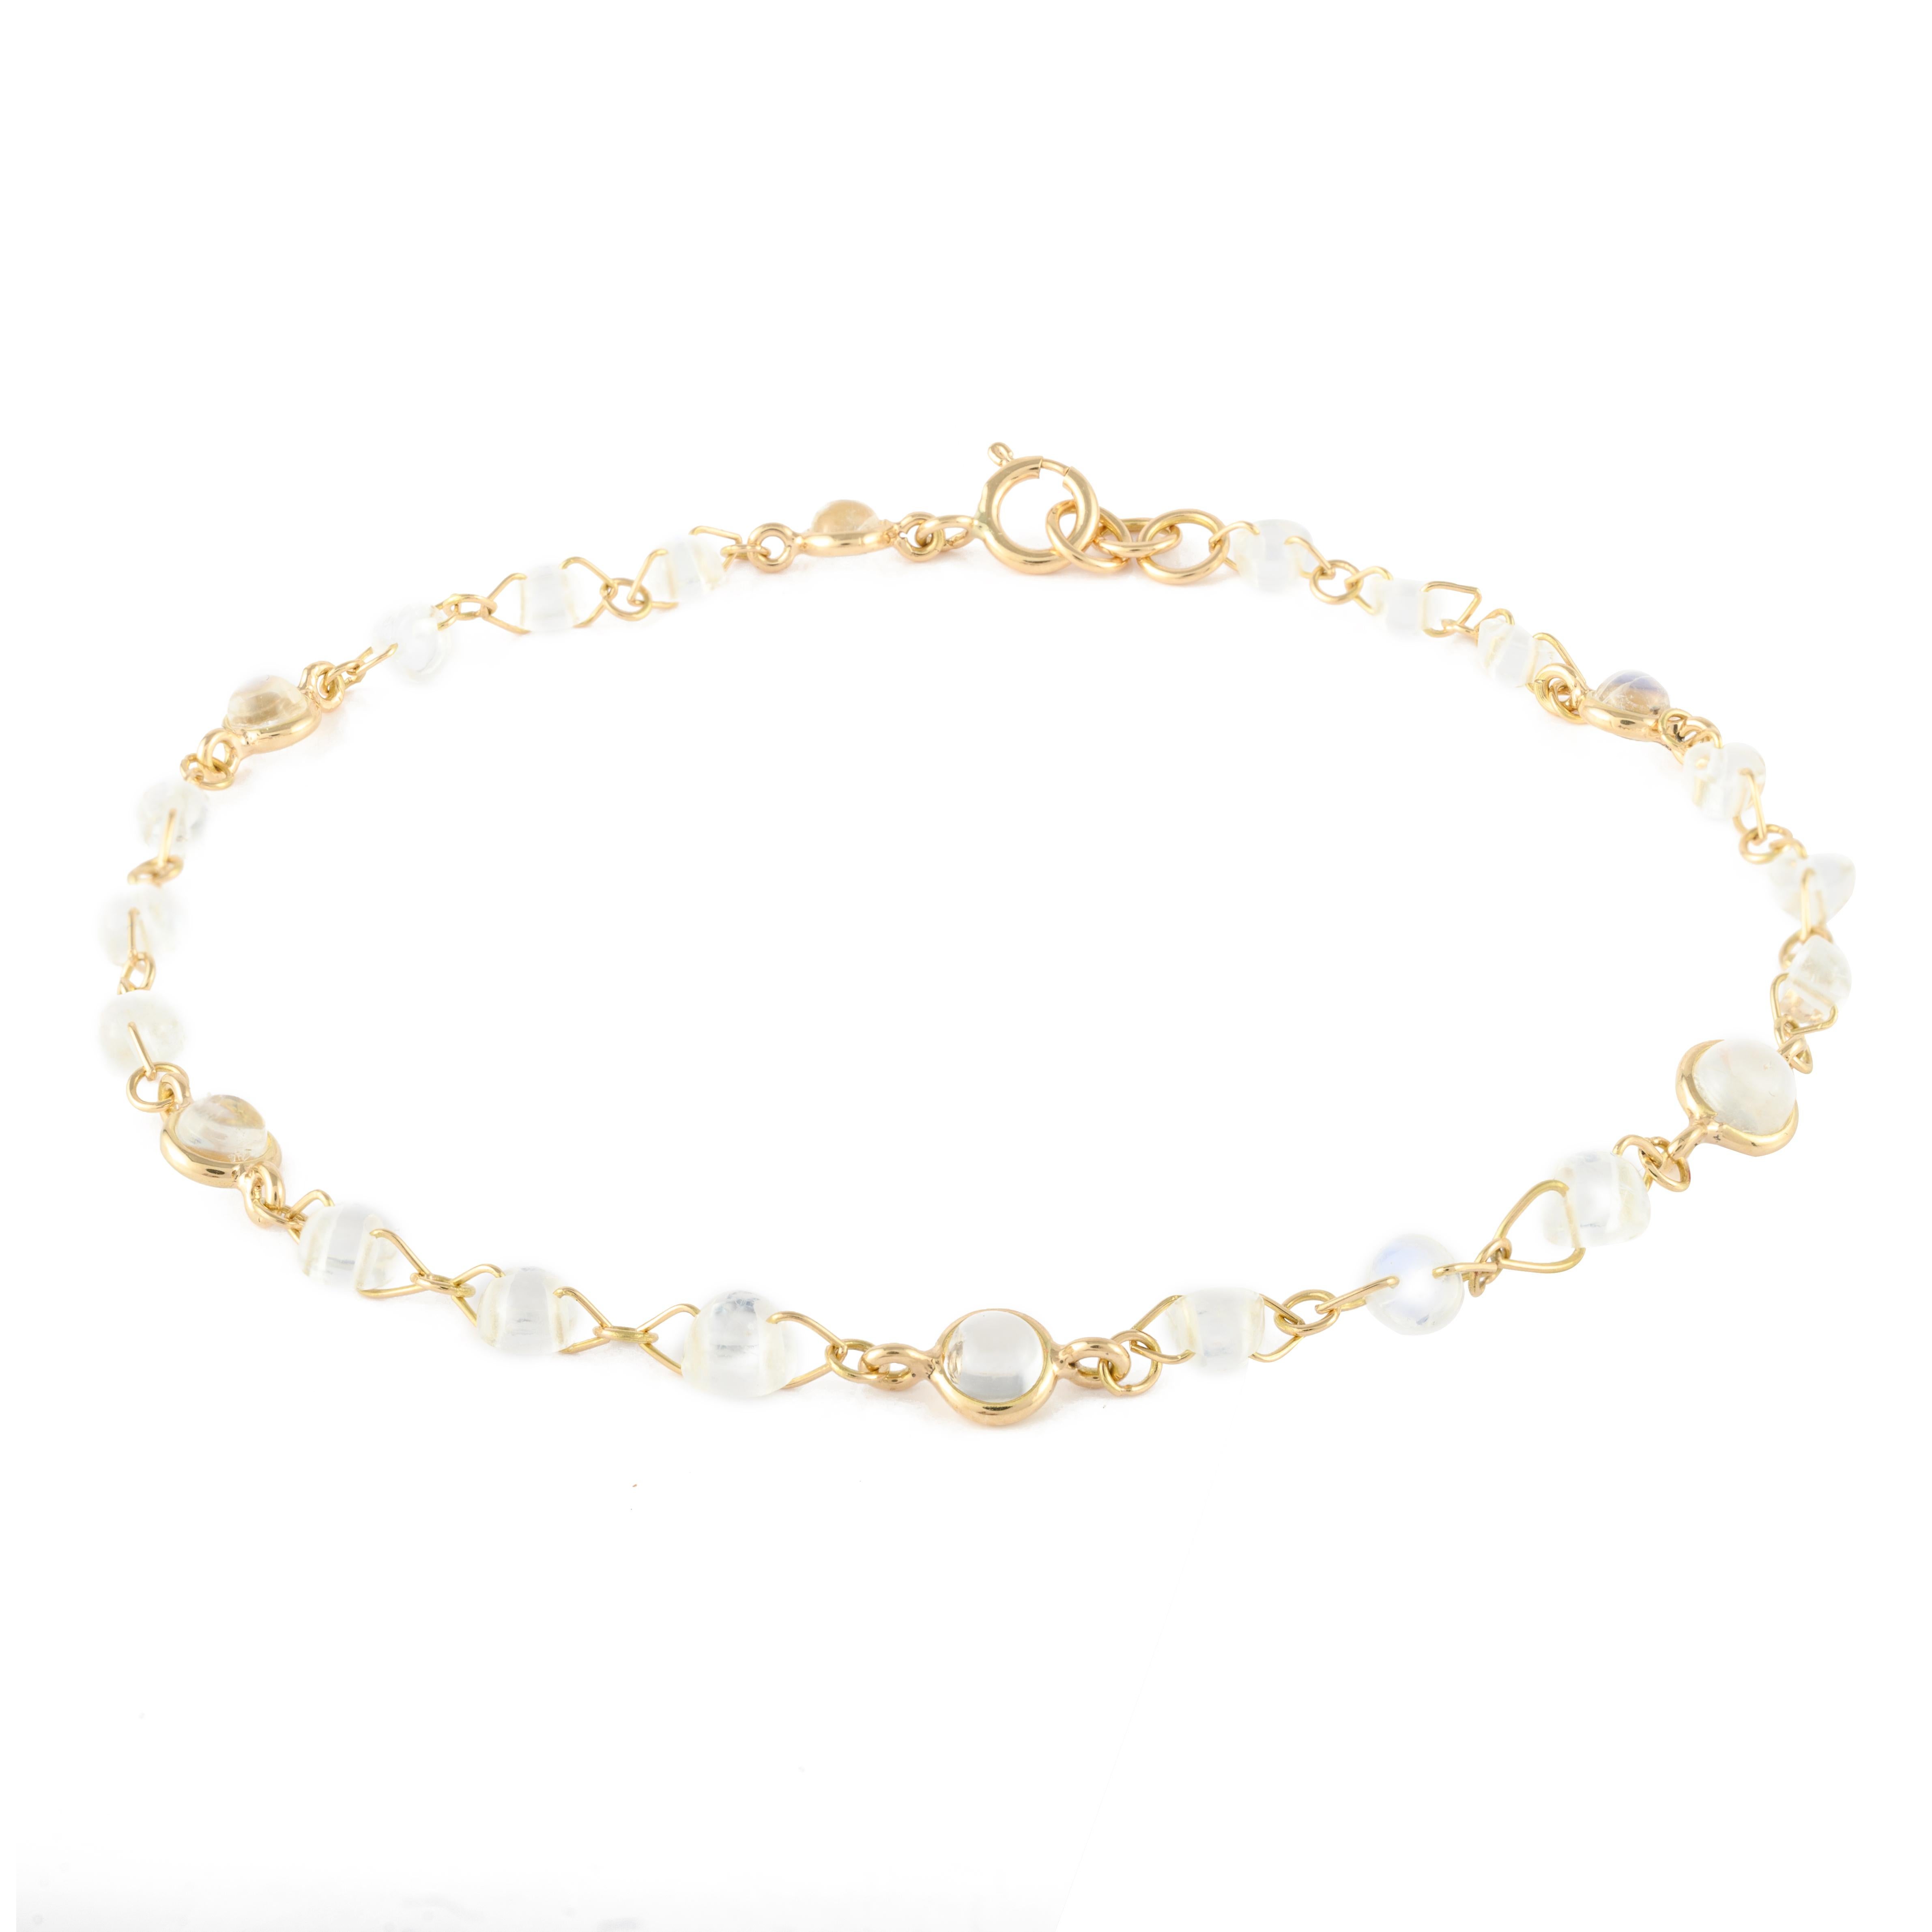 Solid 18k Yellow Gold 6.29 Carat Rainbow Moonstone Chain Bracelet In New Condition For Sale In Houston, TX